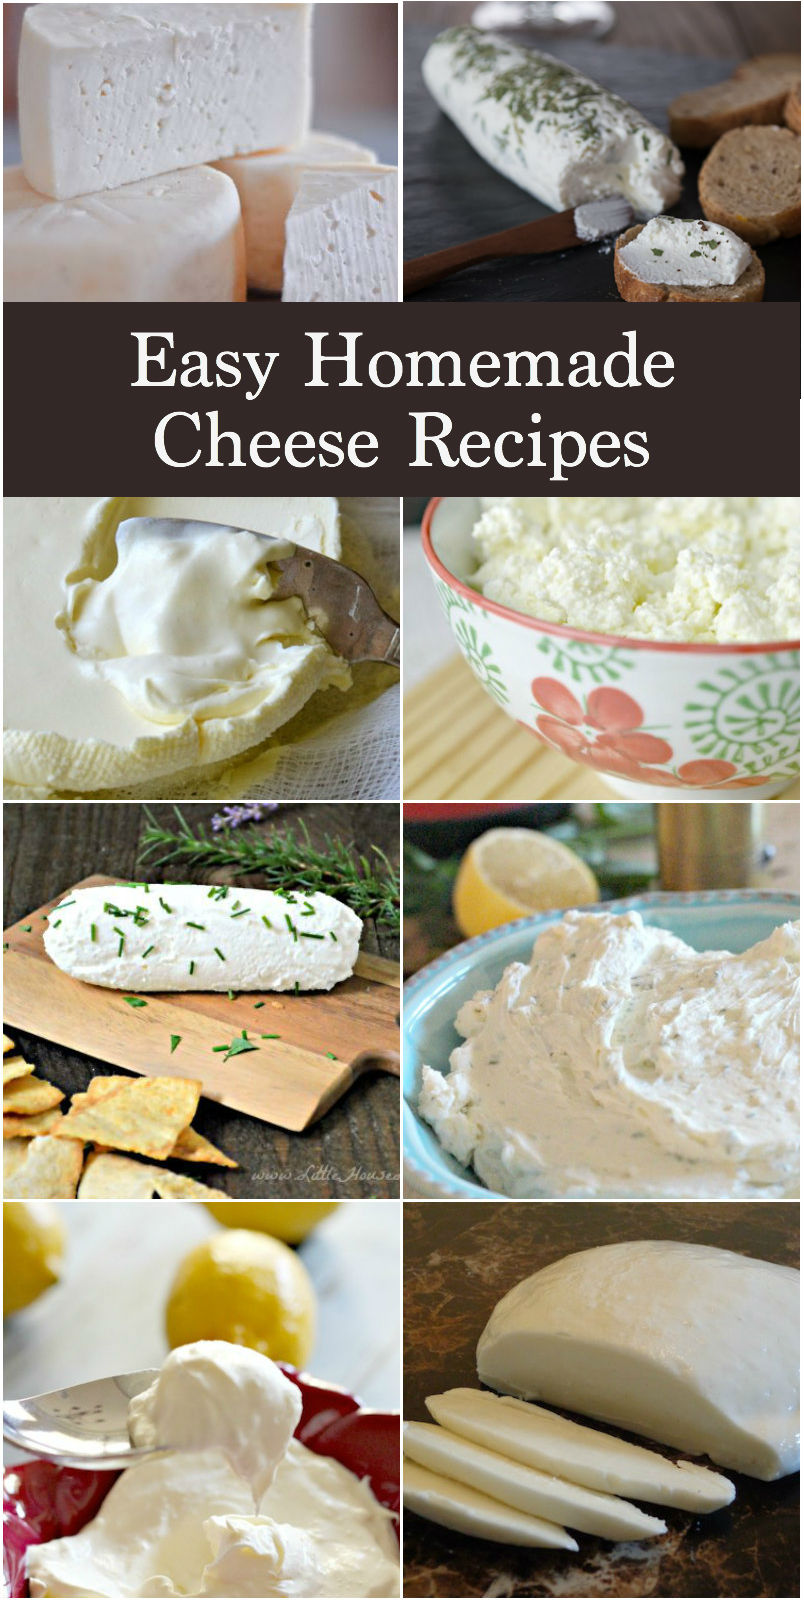 Who knew cheesemaking could be so fun and easy?! Whether cheese is your favorite comfort food or one of your go-to snacks you’re going to love learning how to make these simple homemade cheese recipes at home. They’re also the perfect diy project so grab your kids and get into those kitchens and start cooking!